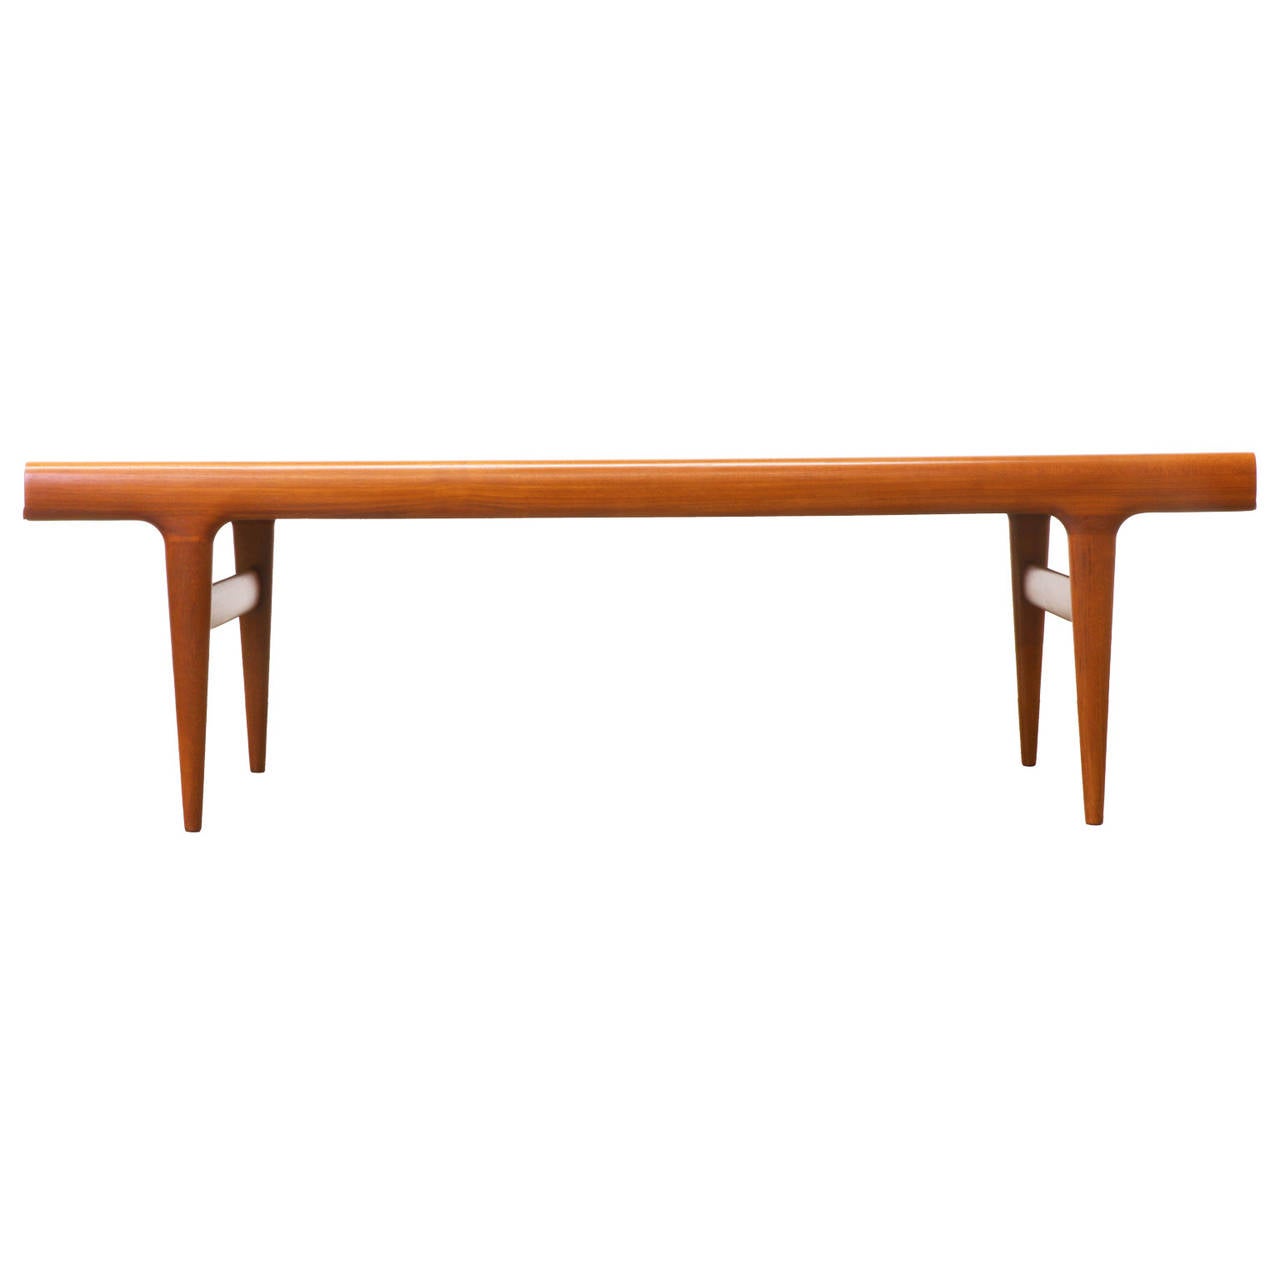 Designer: Johannes Andersen.
Manufacturer: Uldum Mobelfabrik.
Period/Style: Danish Modern.
Country: Denmark.
Date: 1950s.

Dimensions: 20.5″ H x 67.5″ L x 23.5″ W.
Materials: Teak.
Condition: Excellent, Newly Refinished.
Number of Items: